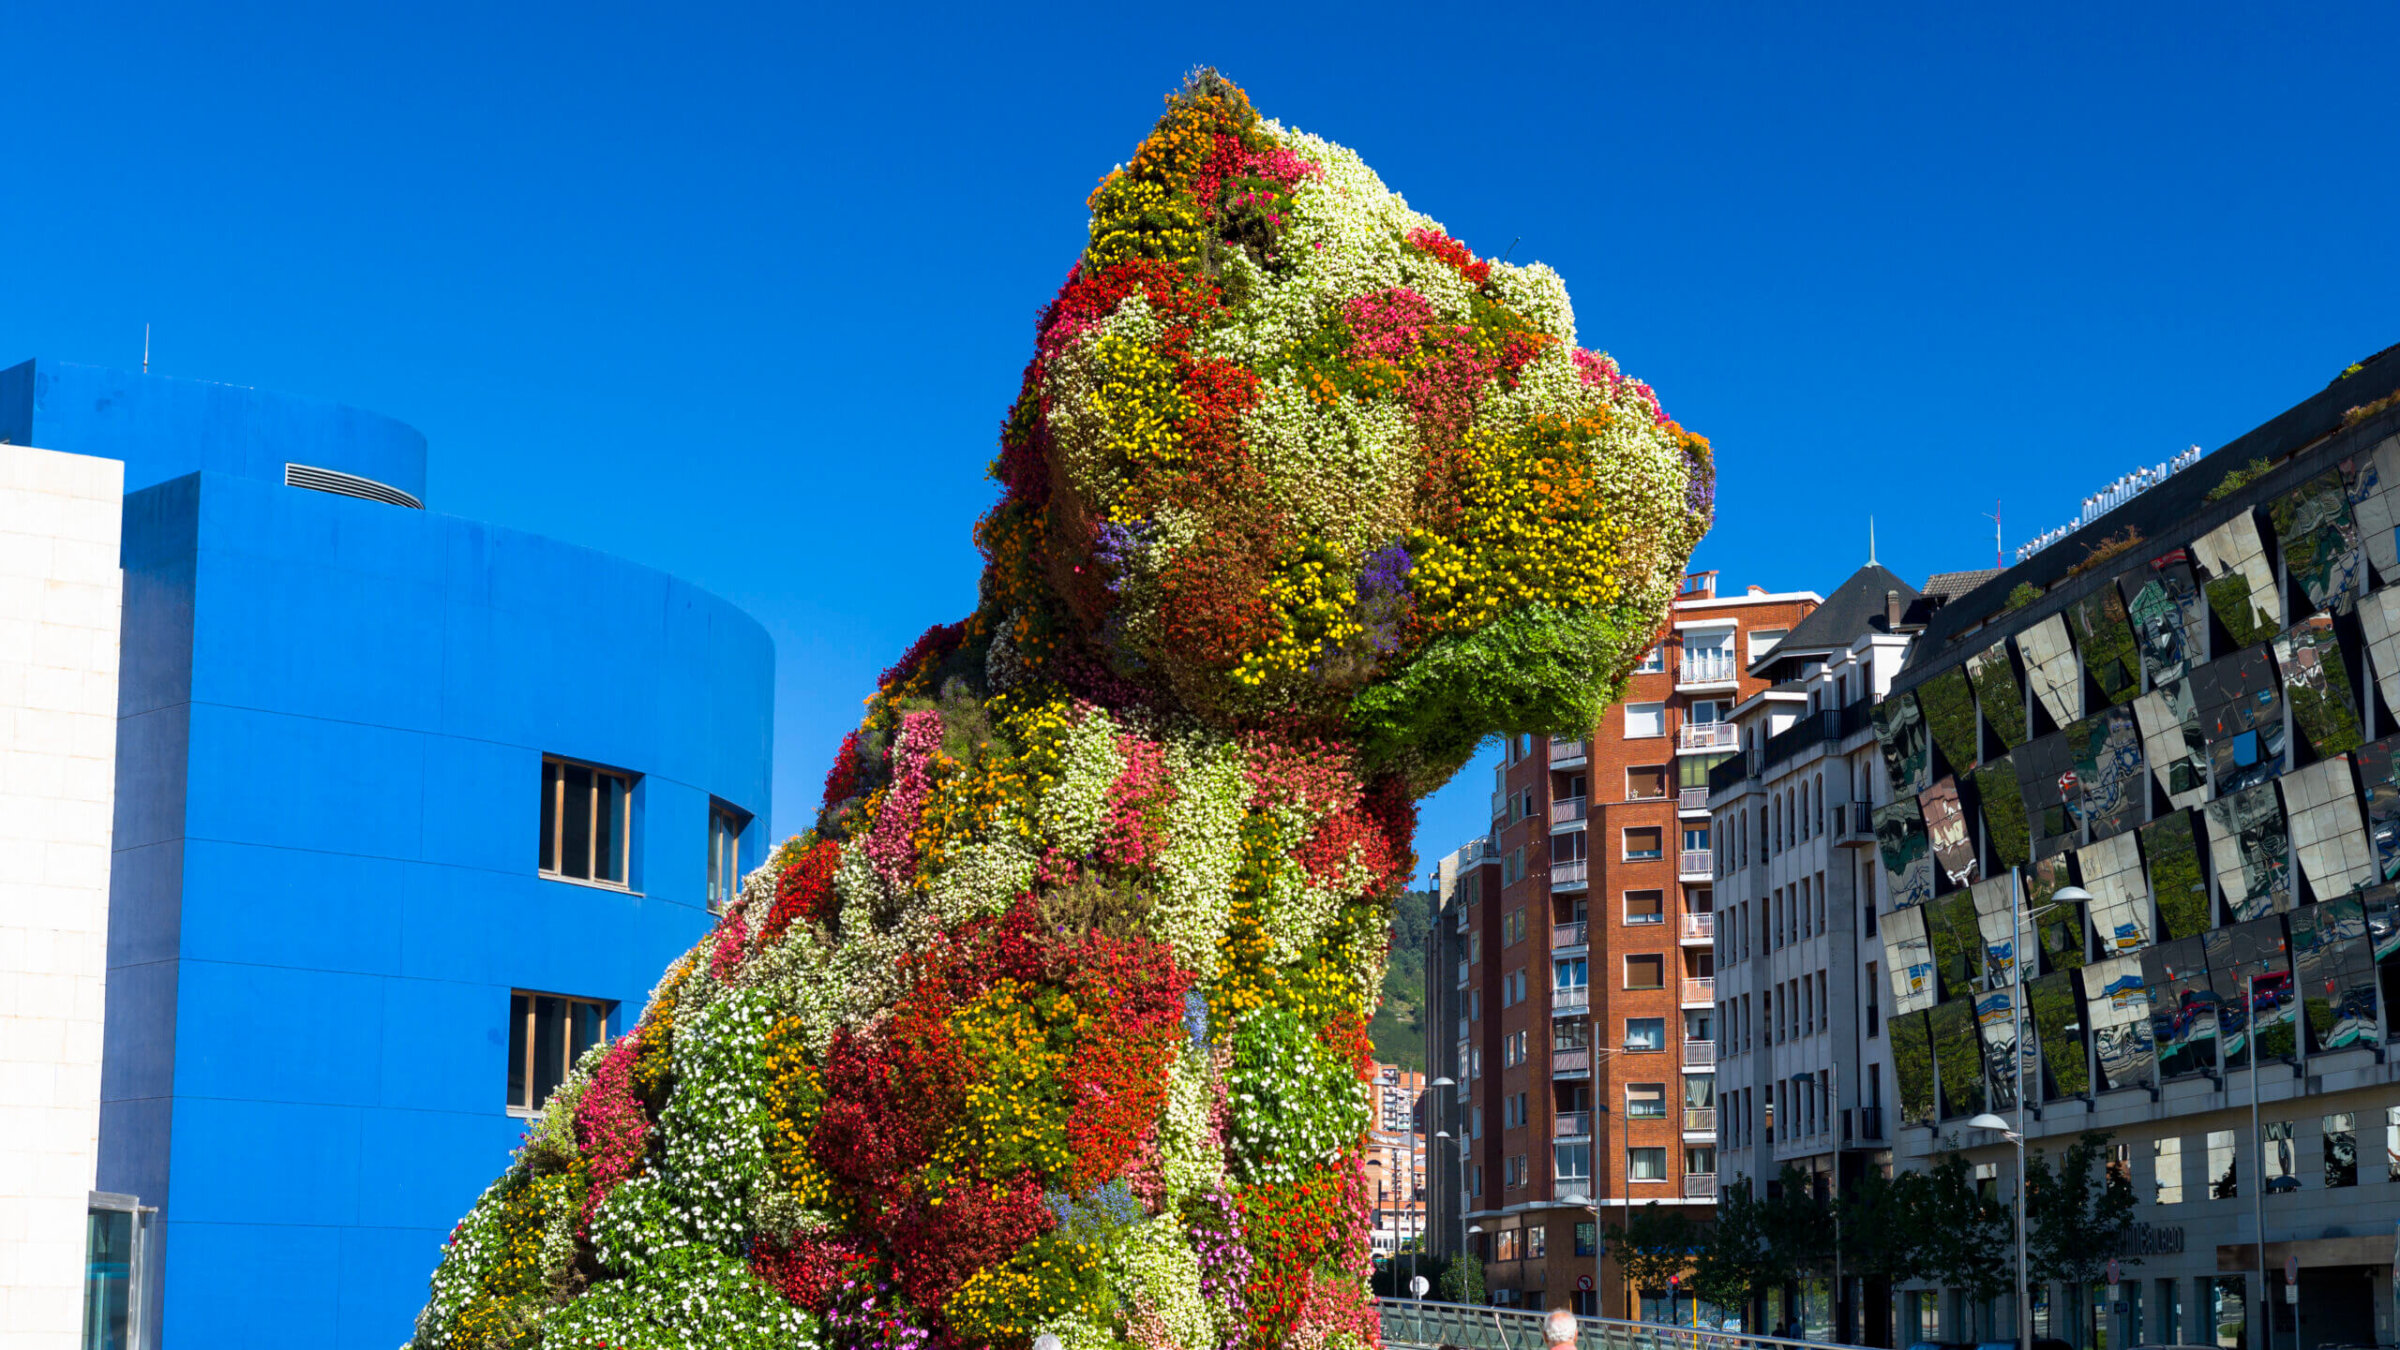 "Masterpiece," an installation of a puppy several dozen feet tall constructed with a skin of flowers